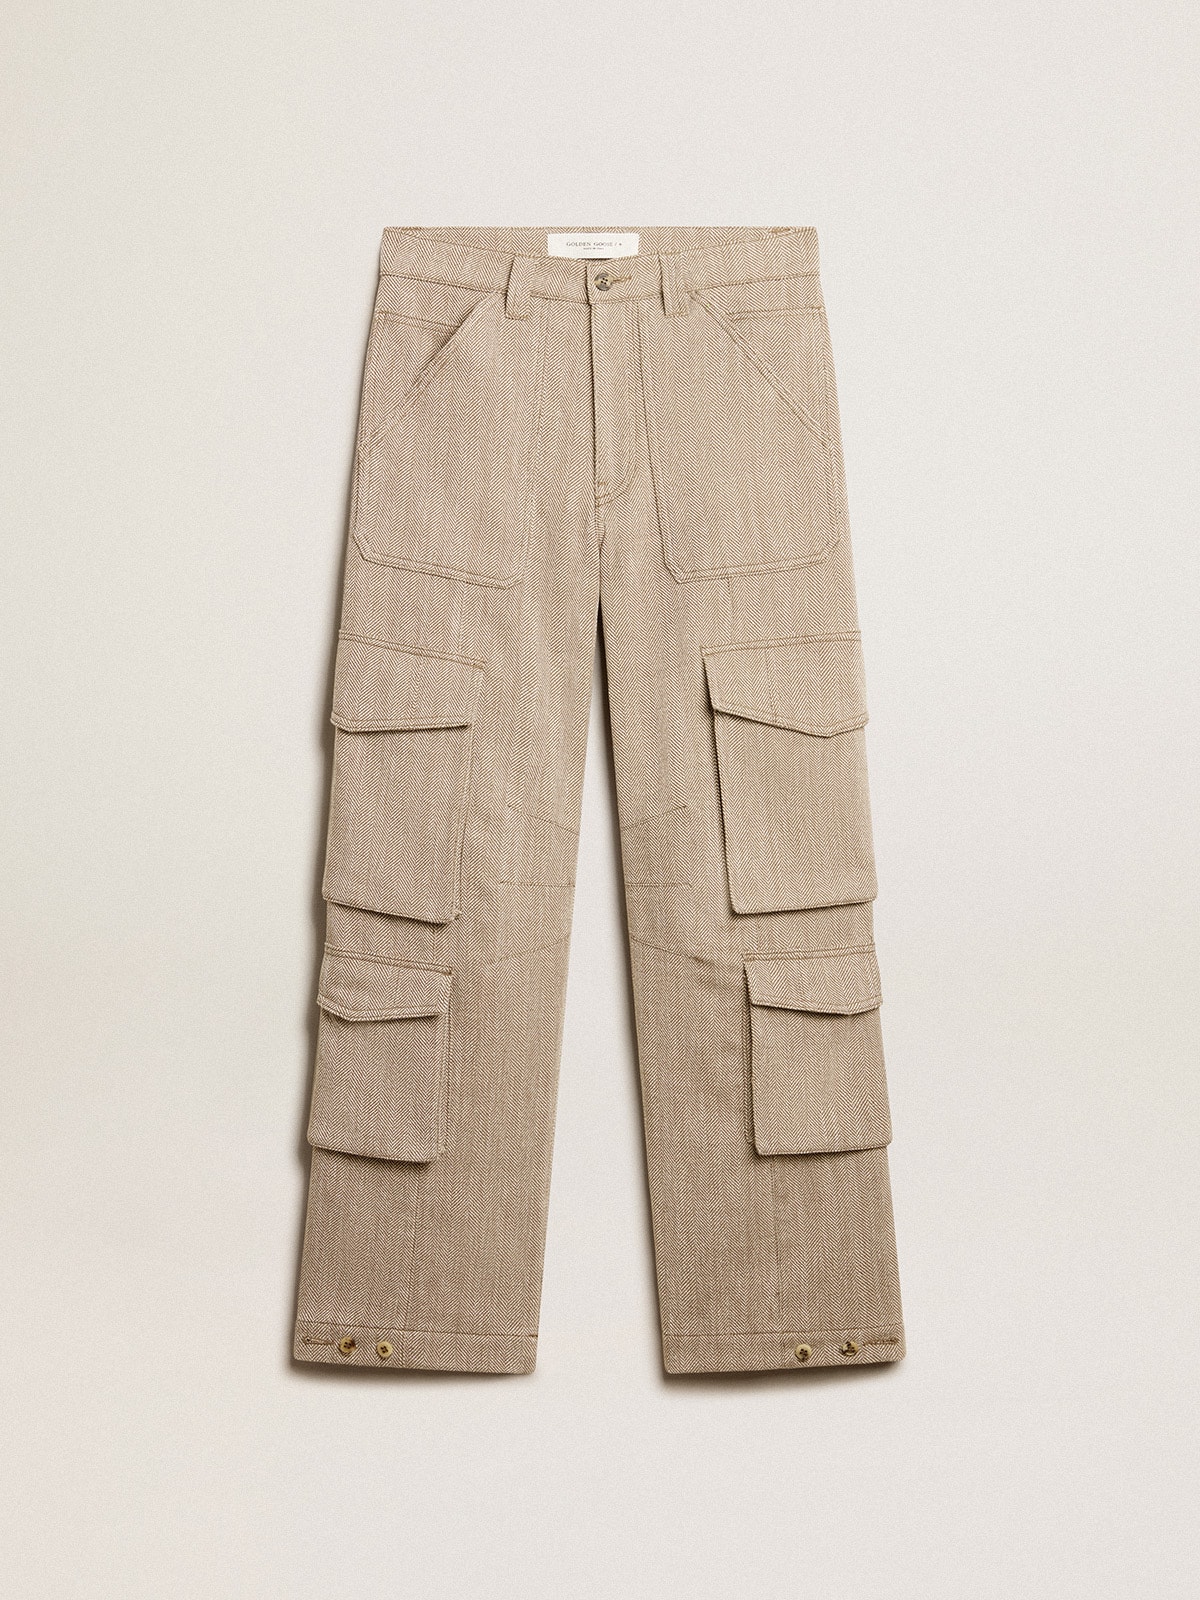 Basic Corduroy Cargo Pants  Colored pants outfits, Aesthetic